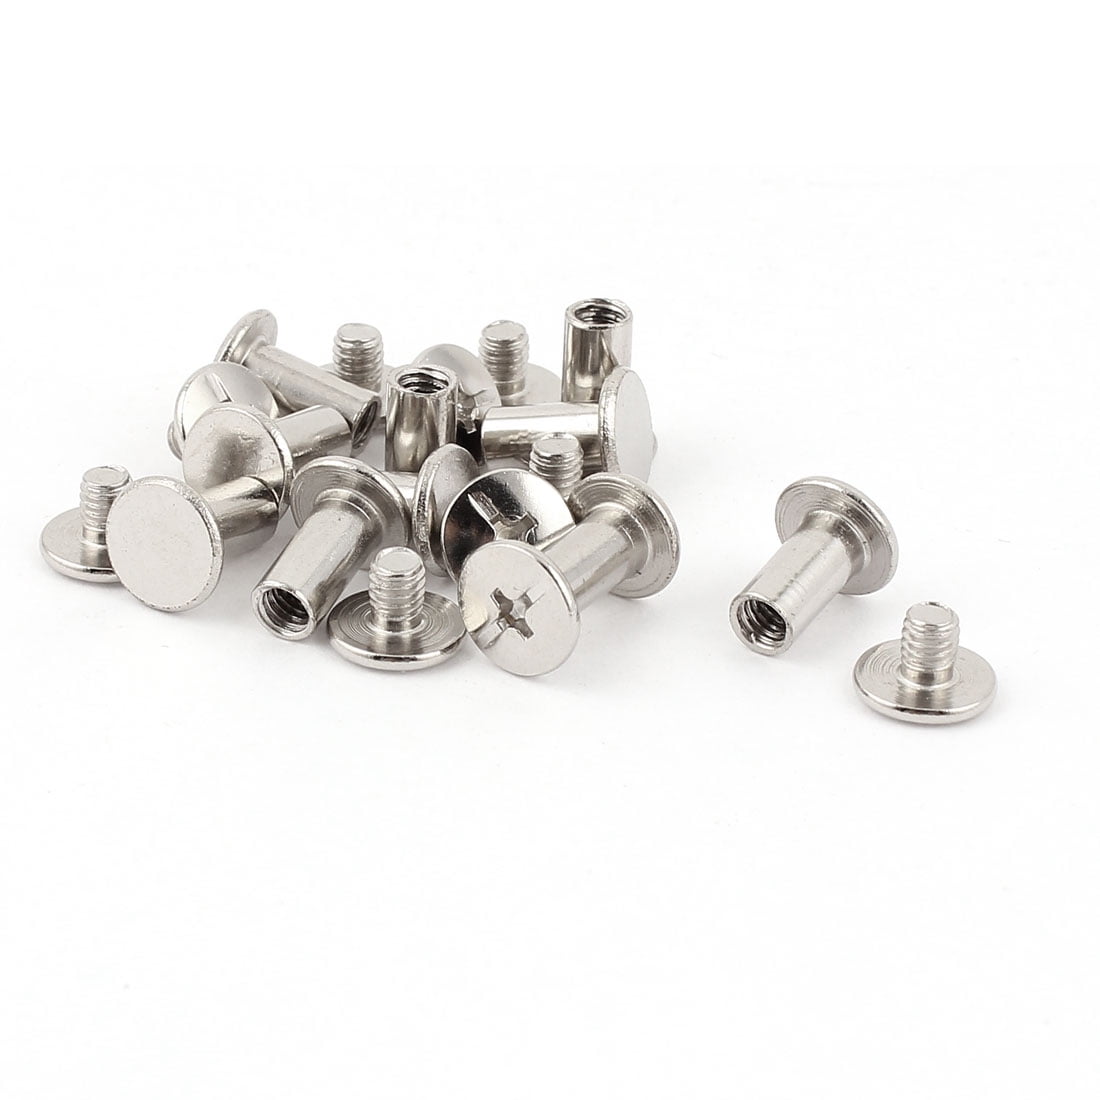 uxcell 5mmx18mm Binding Chicago Screw Posts Barrel Nuts Docking Rivets Silver Tone 20pcs 